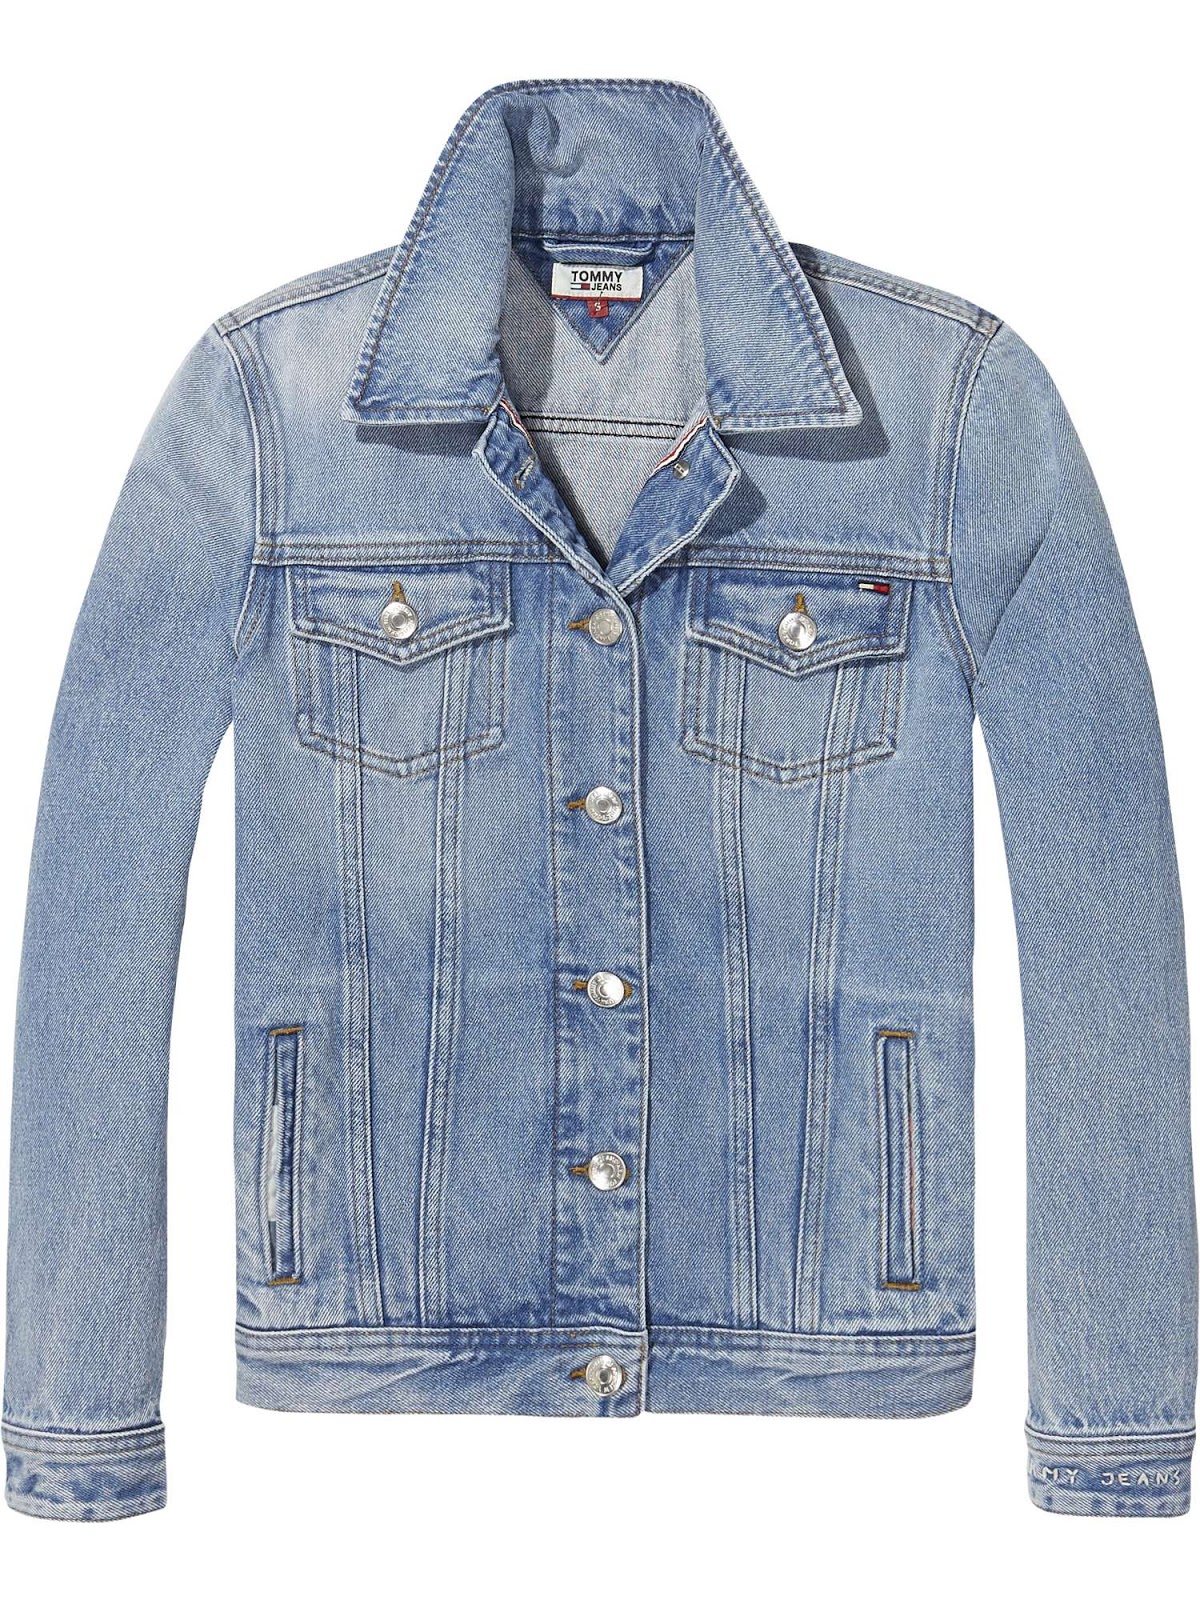 The Best Denim Jackets From The High Street + WIW | My Midlife Fashion